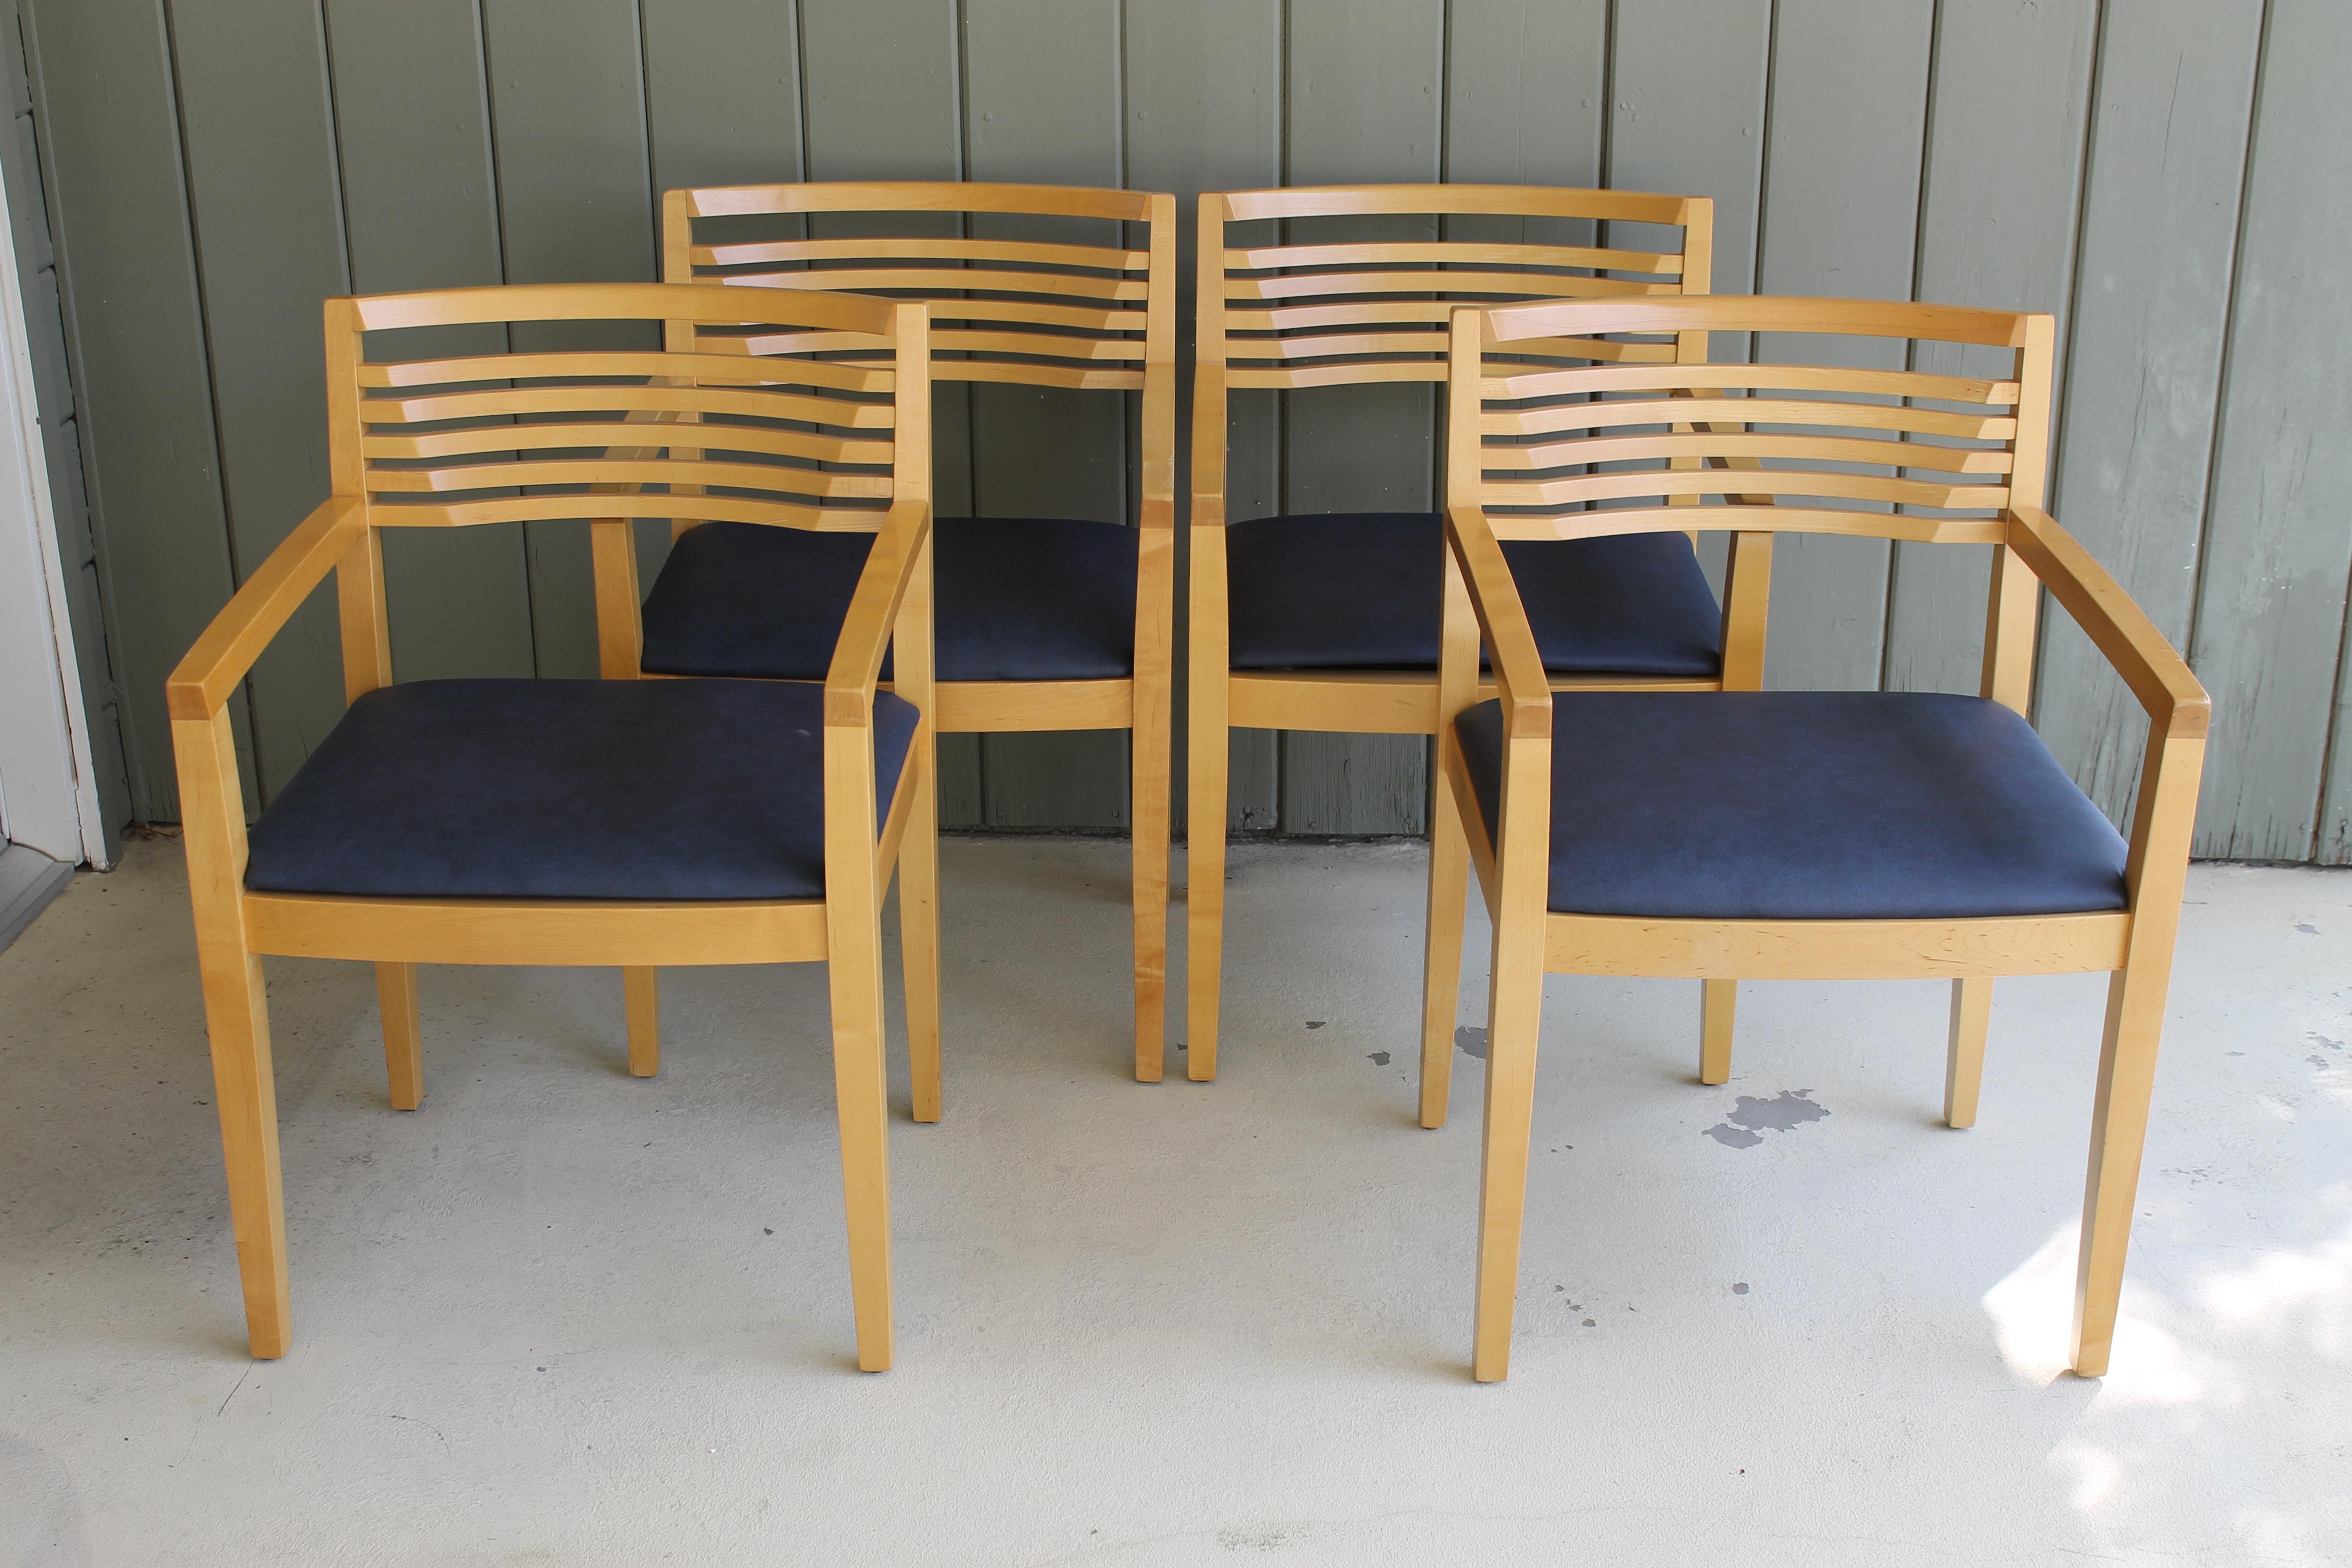 Four armchairs by Linda and Joseph Ricchio and distributed by Knoll, Inc. Solid beechwood with tapered armrests and scooped backs. Each chair measures 21.5